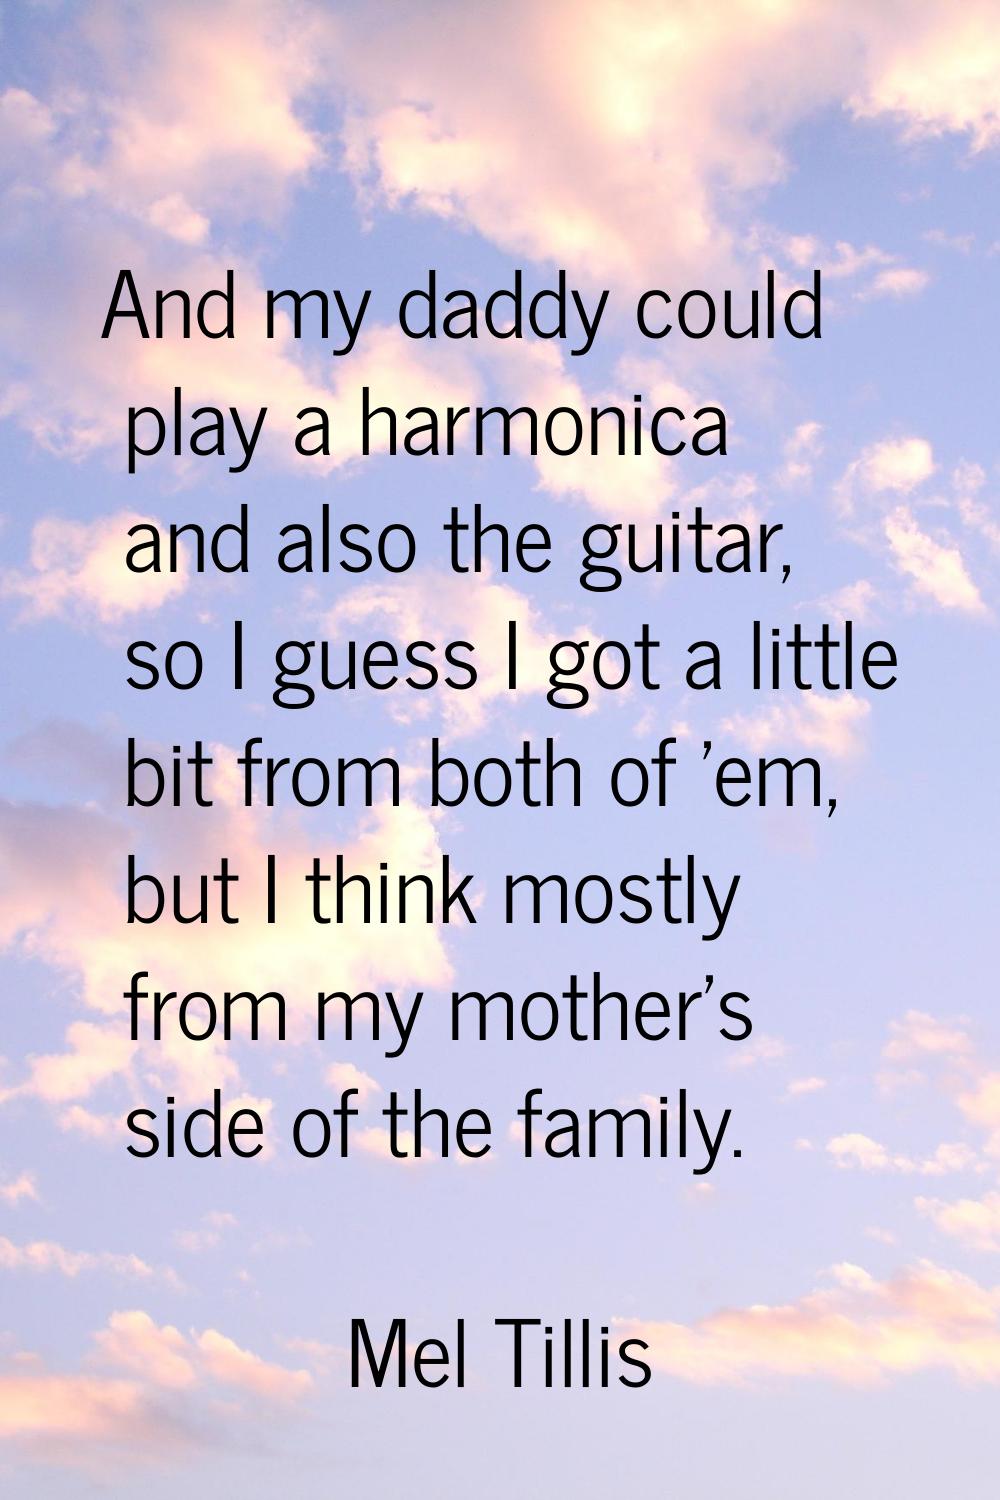 And my daddy could play a harmonica and also the guitar, so I guess I got a little bit from both of